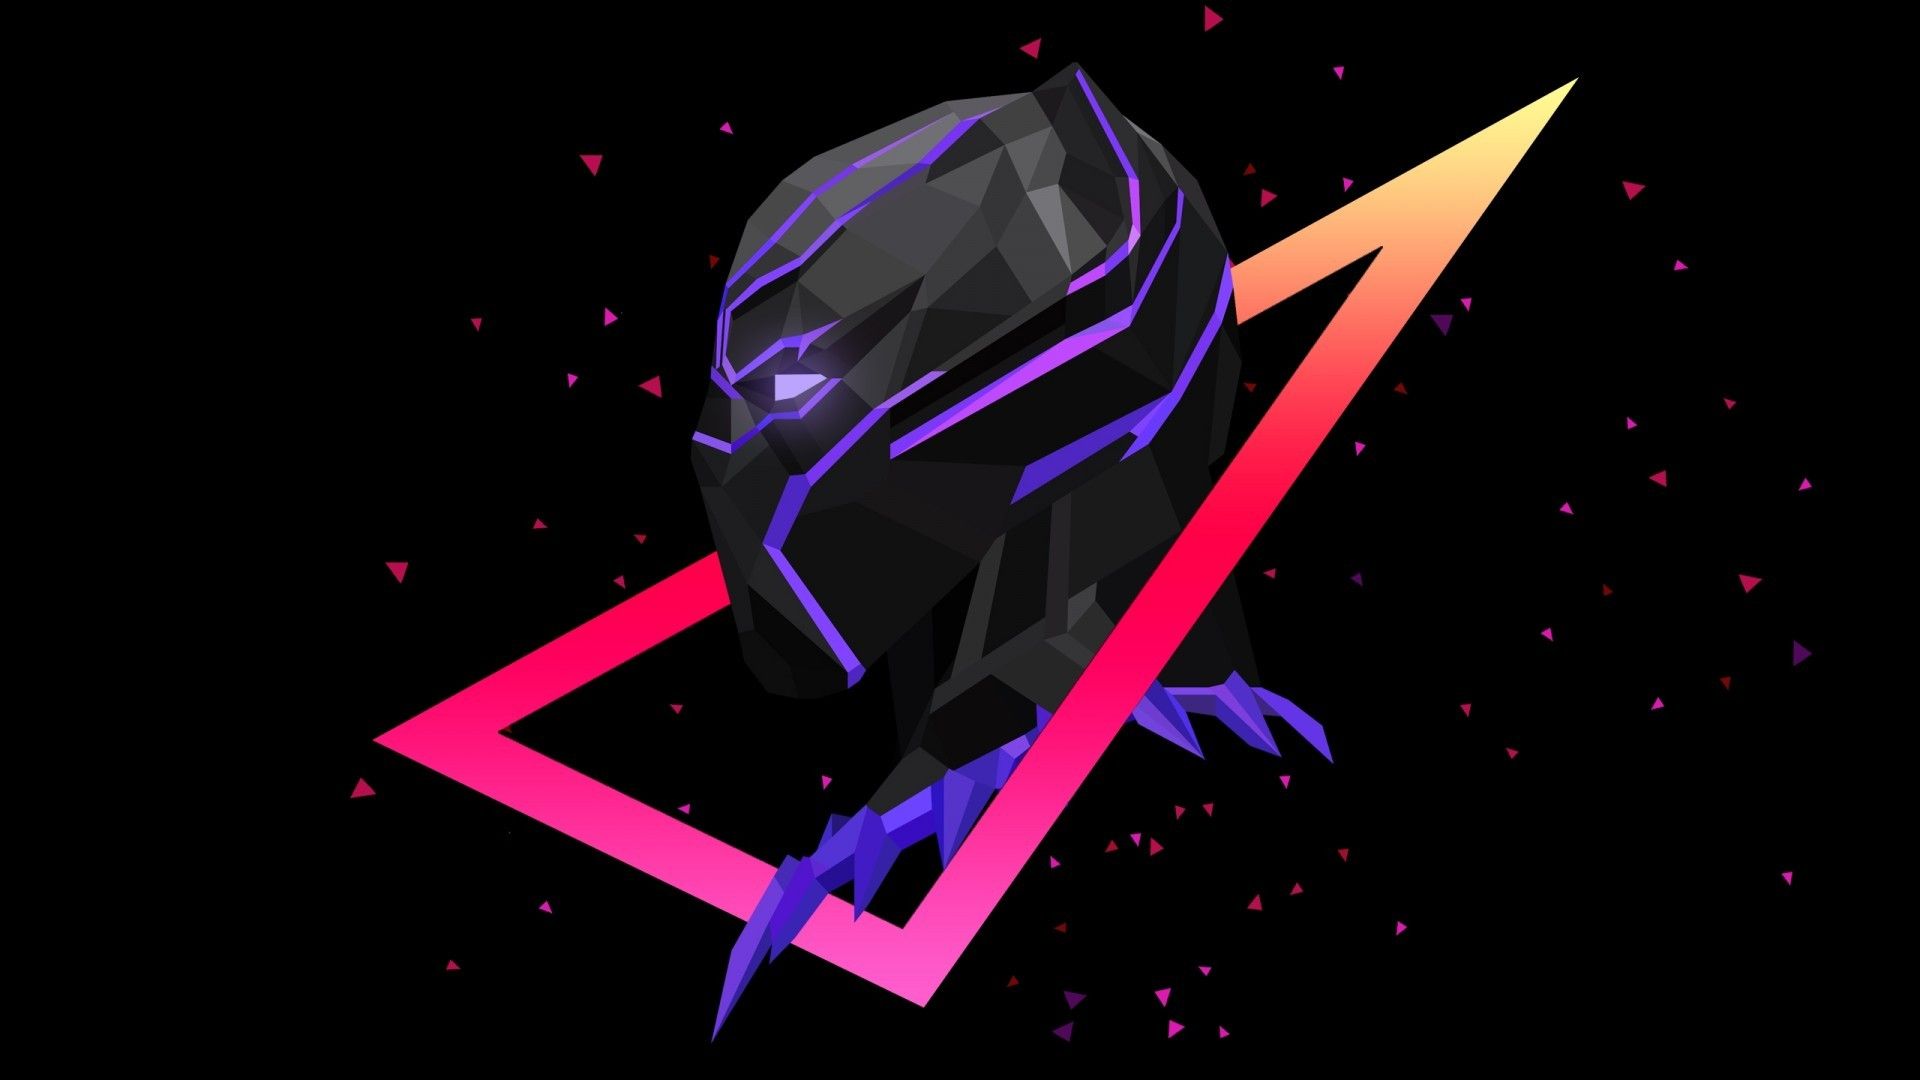 Download 1920x1080 Black Panther, Profile View, Low Poly Wallpaper for Widescreen